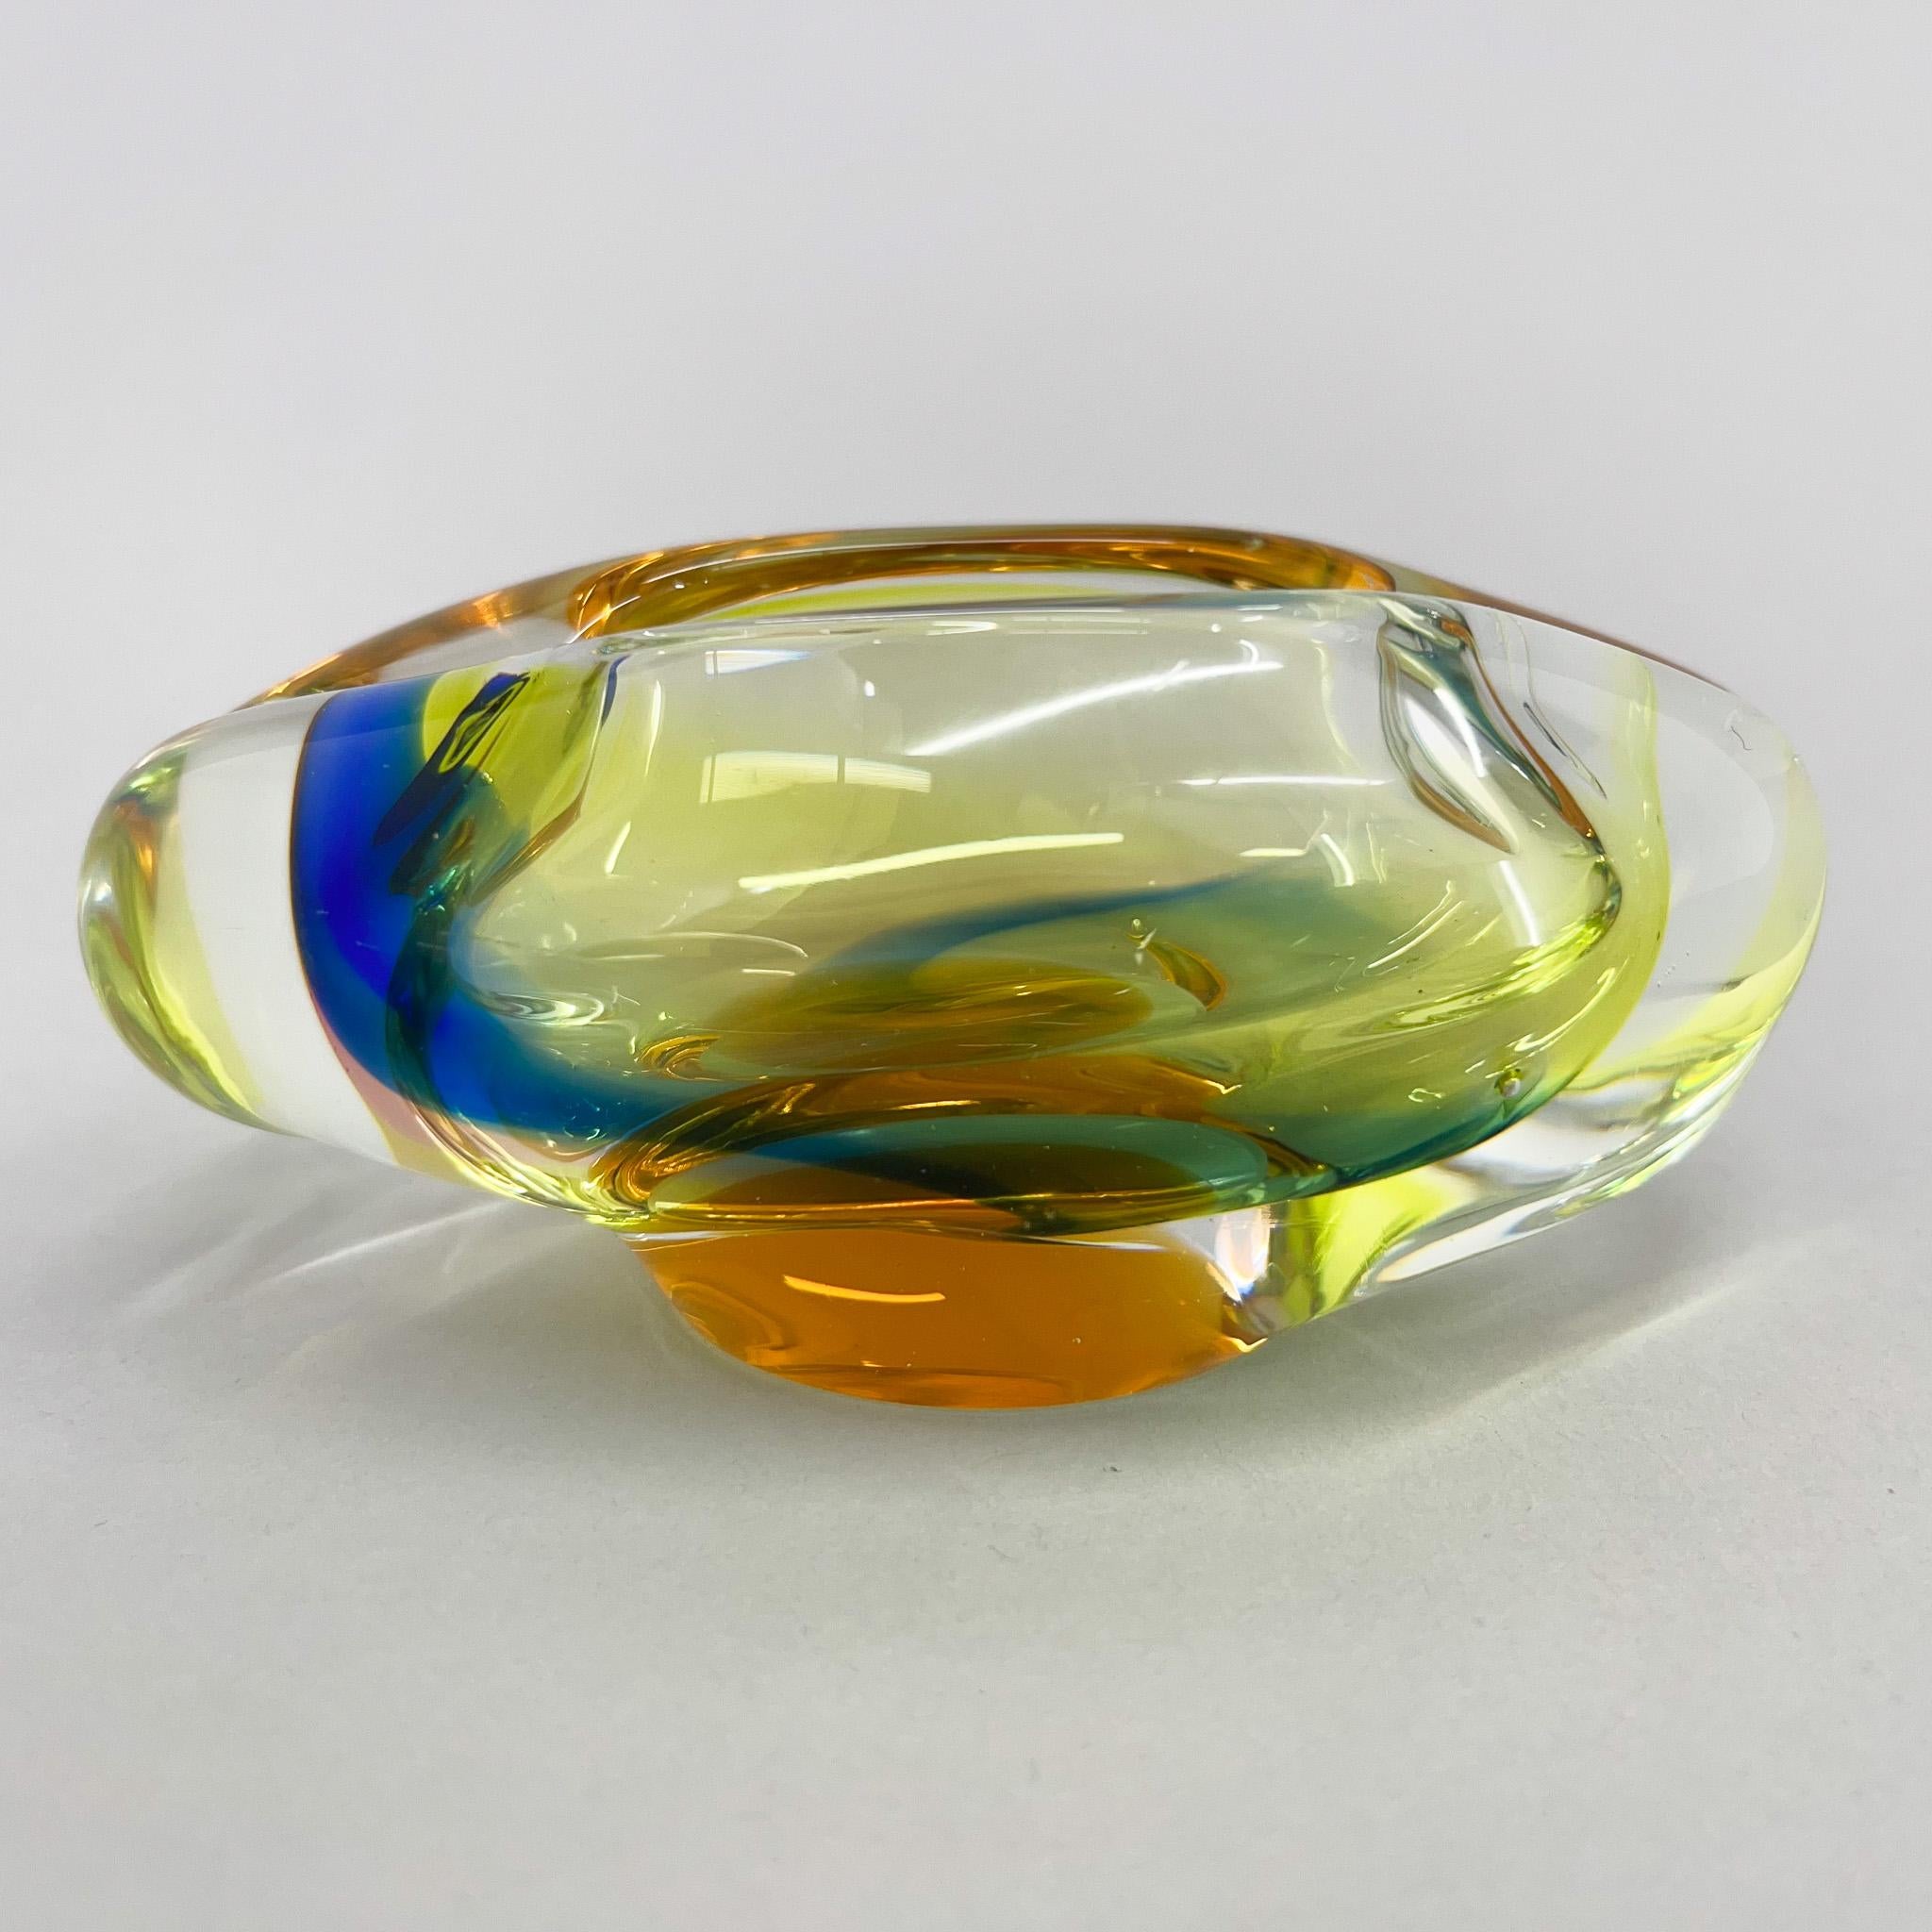 Multicoloured vintage glass Bohemian ashtray from the 1960's. The ashtray was made in Czechoslovakia in Novy Bor Glassworks (Borocrystal). Very good vintage condition. 